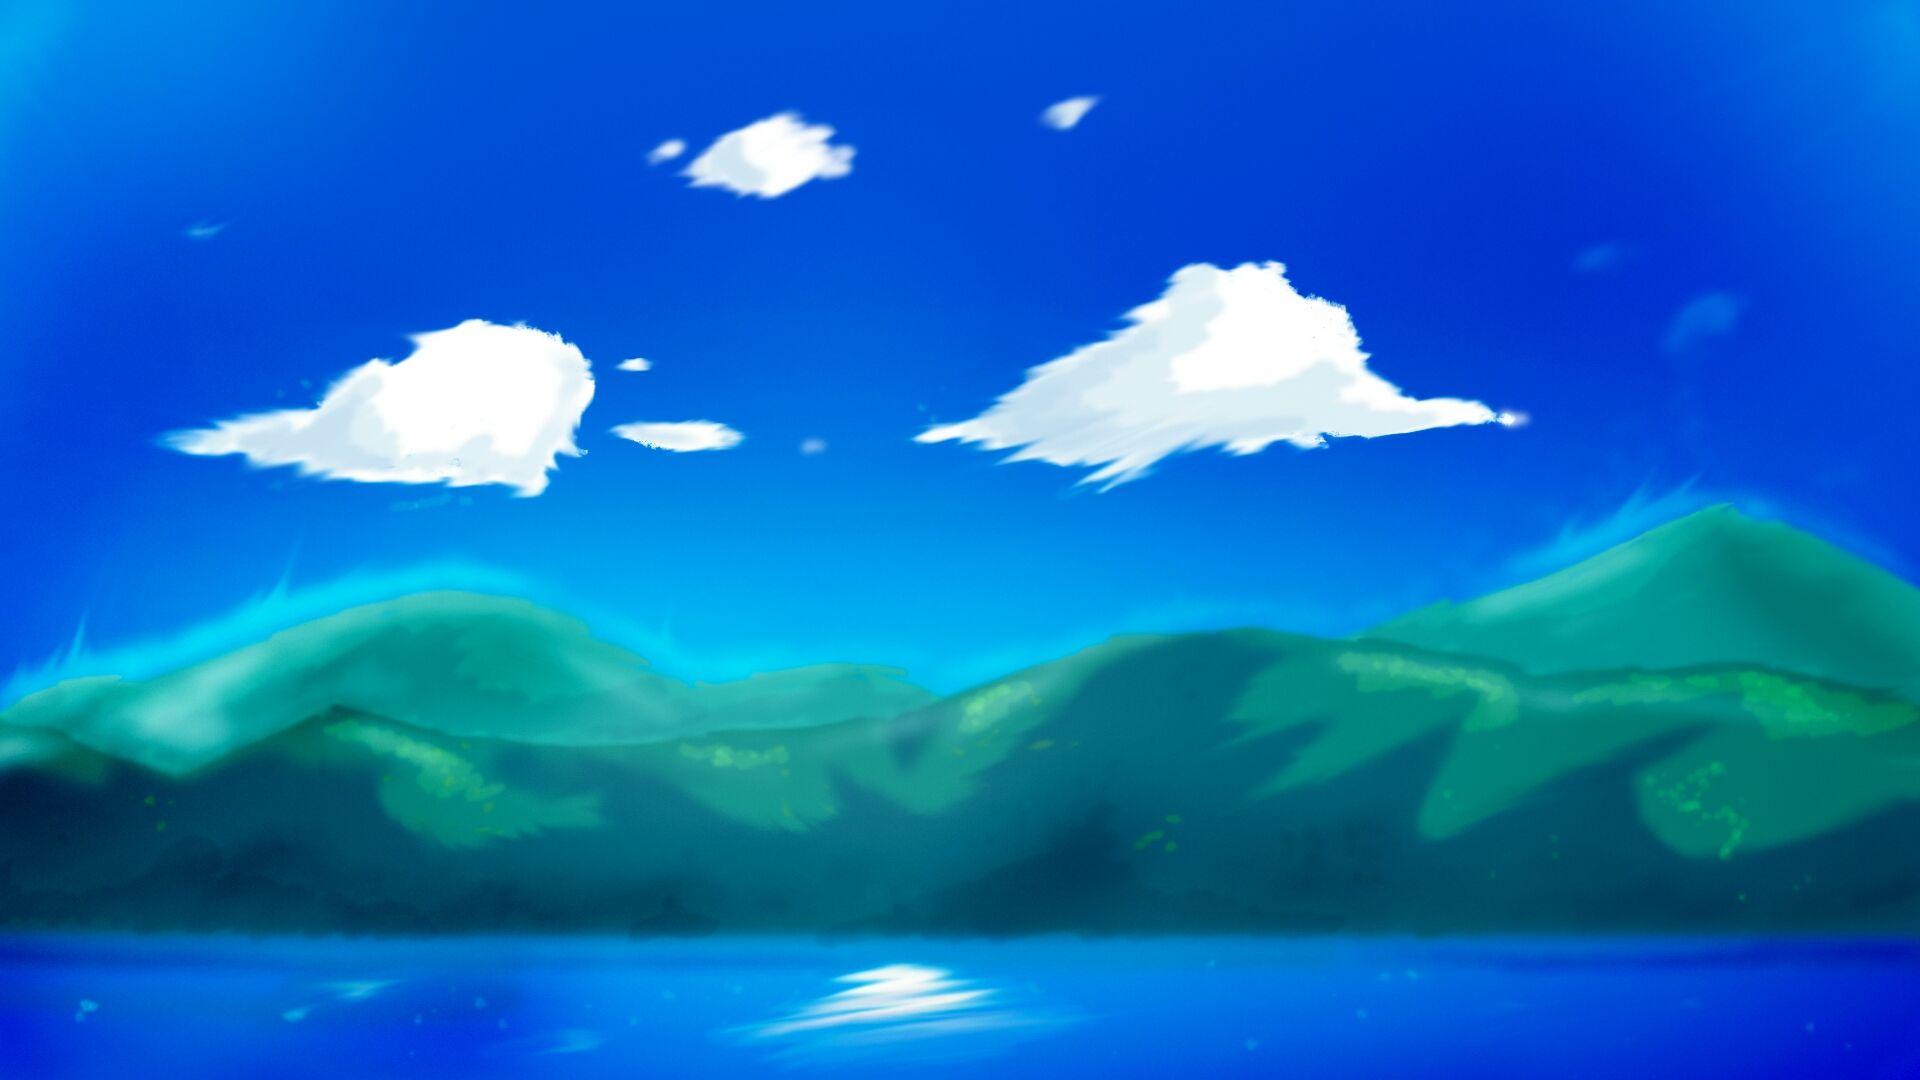 Epic anime background by MAnimationMakers on Newgrounds